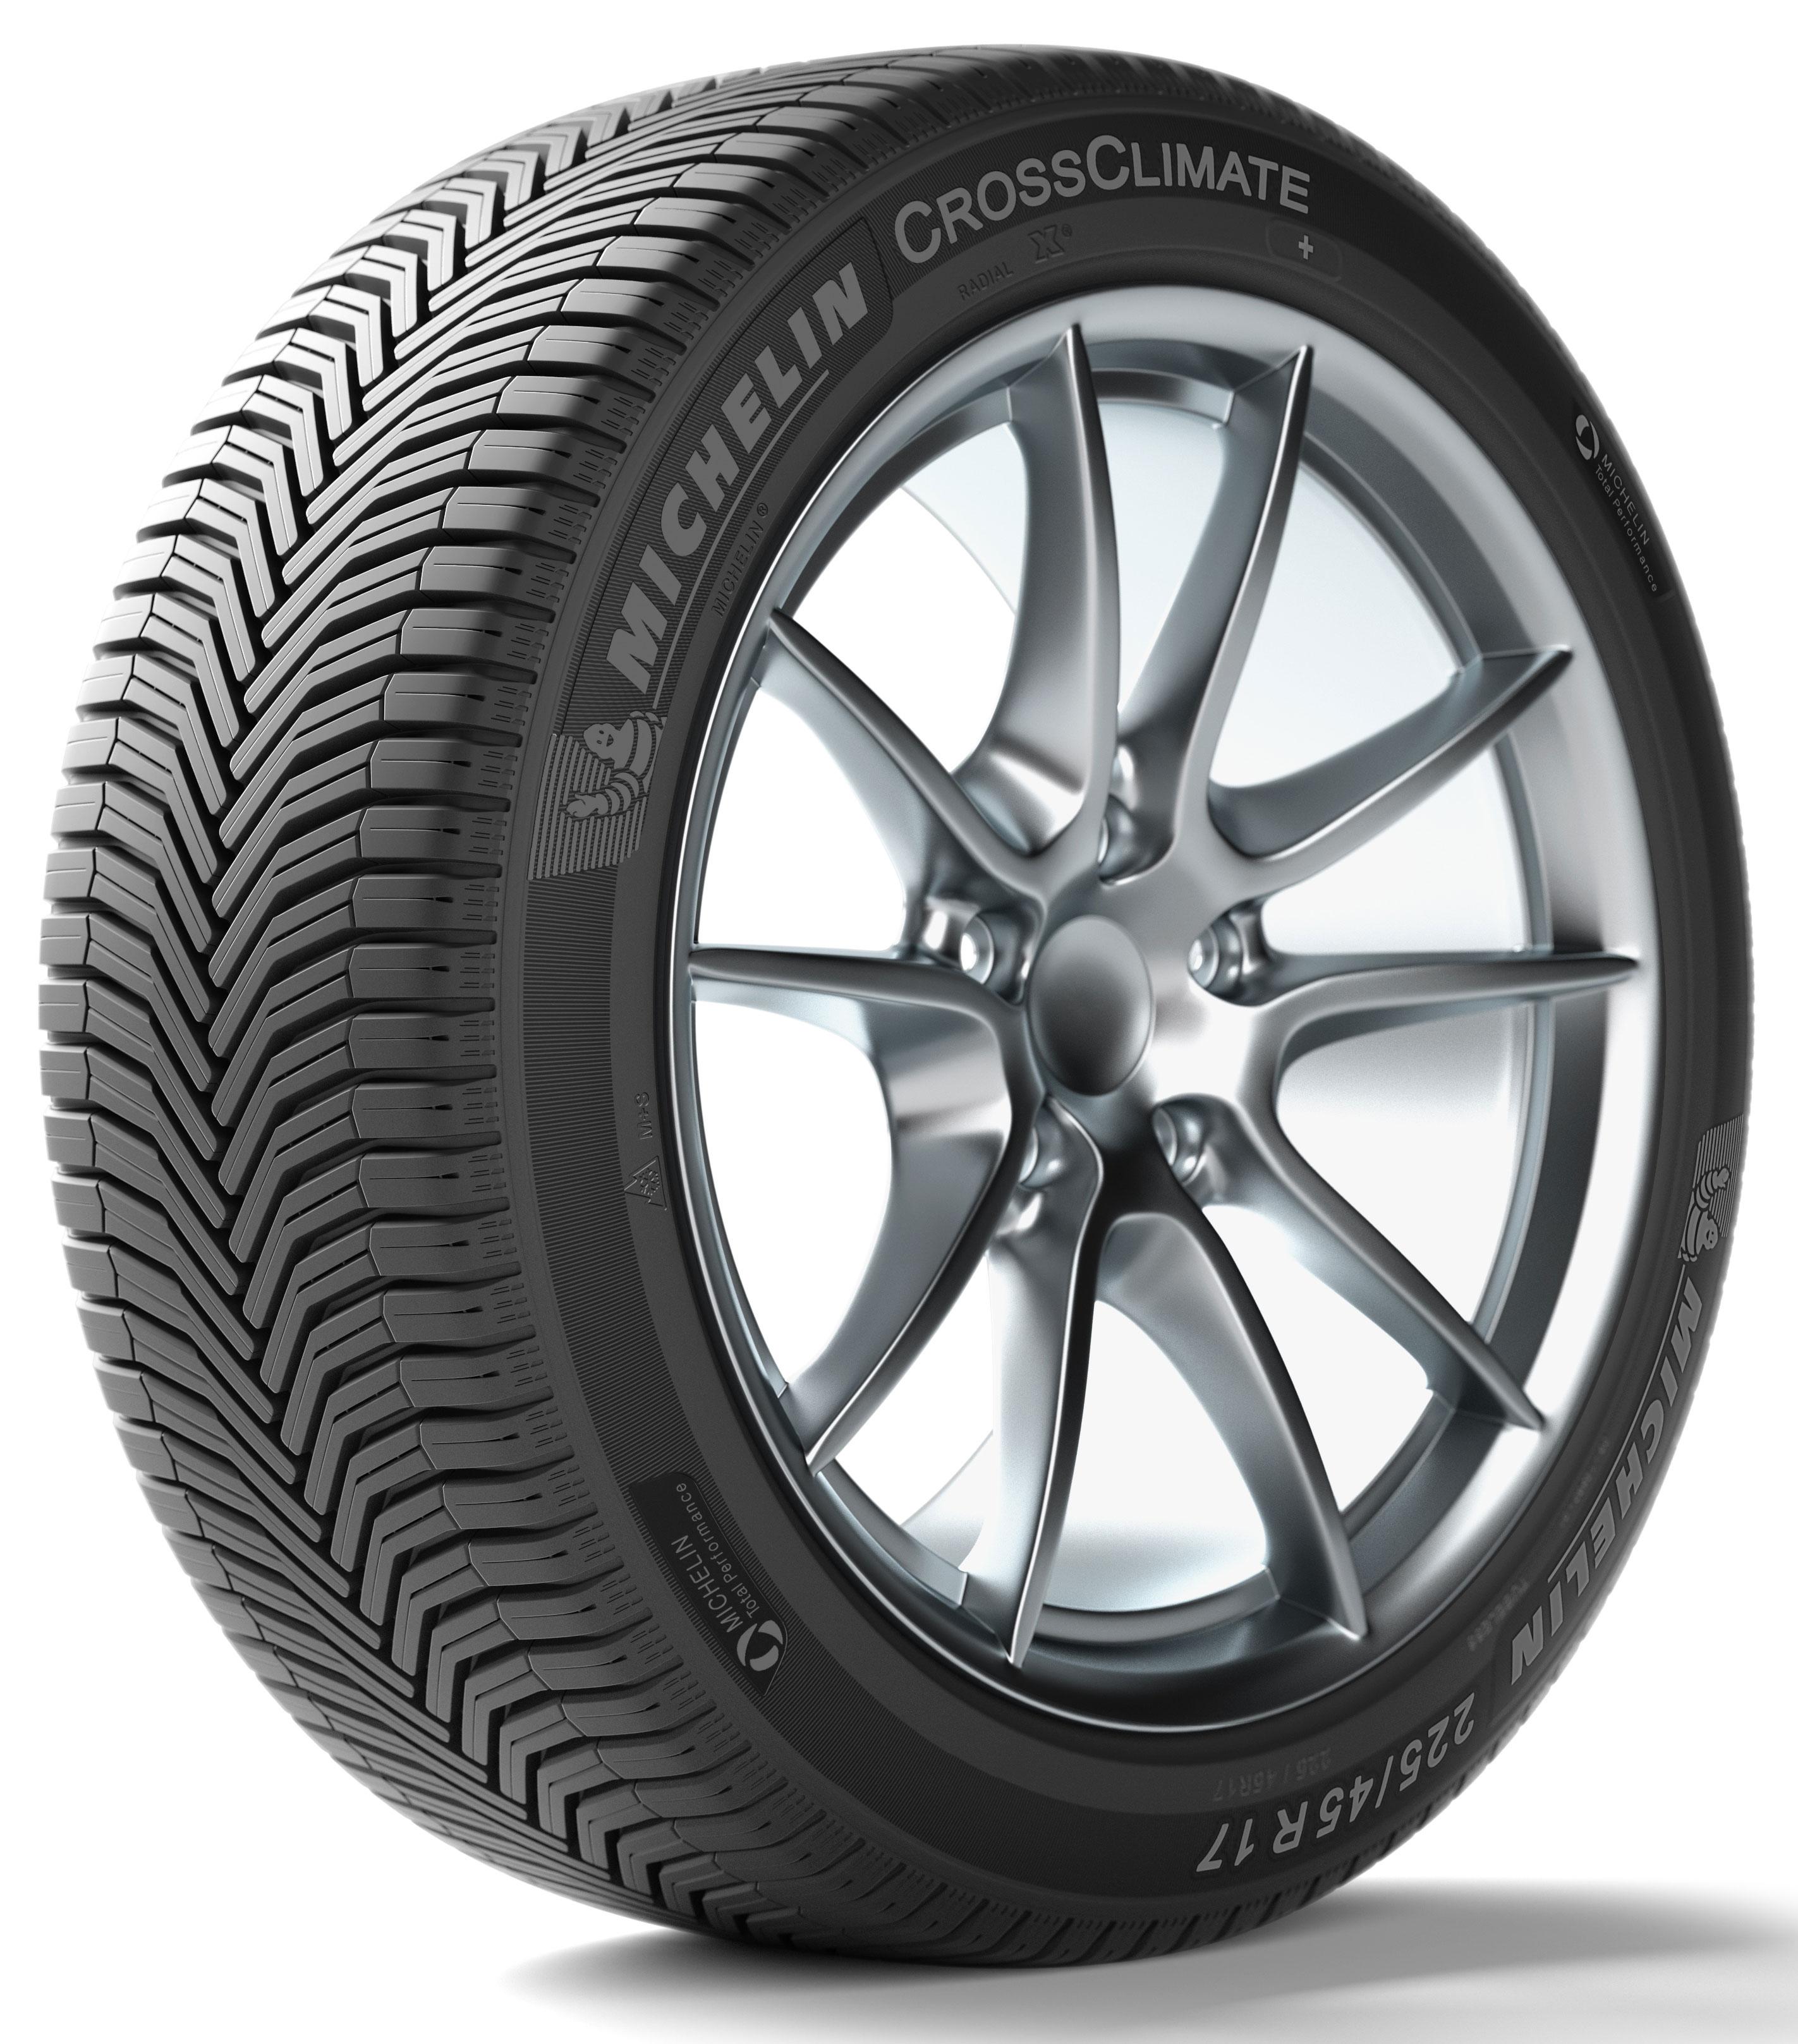 Anvelope all seasons MICHELIN CrossClimate M+S XL 185/60 R14 86H